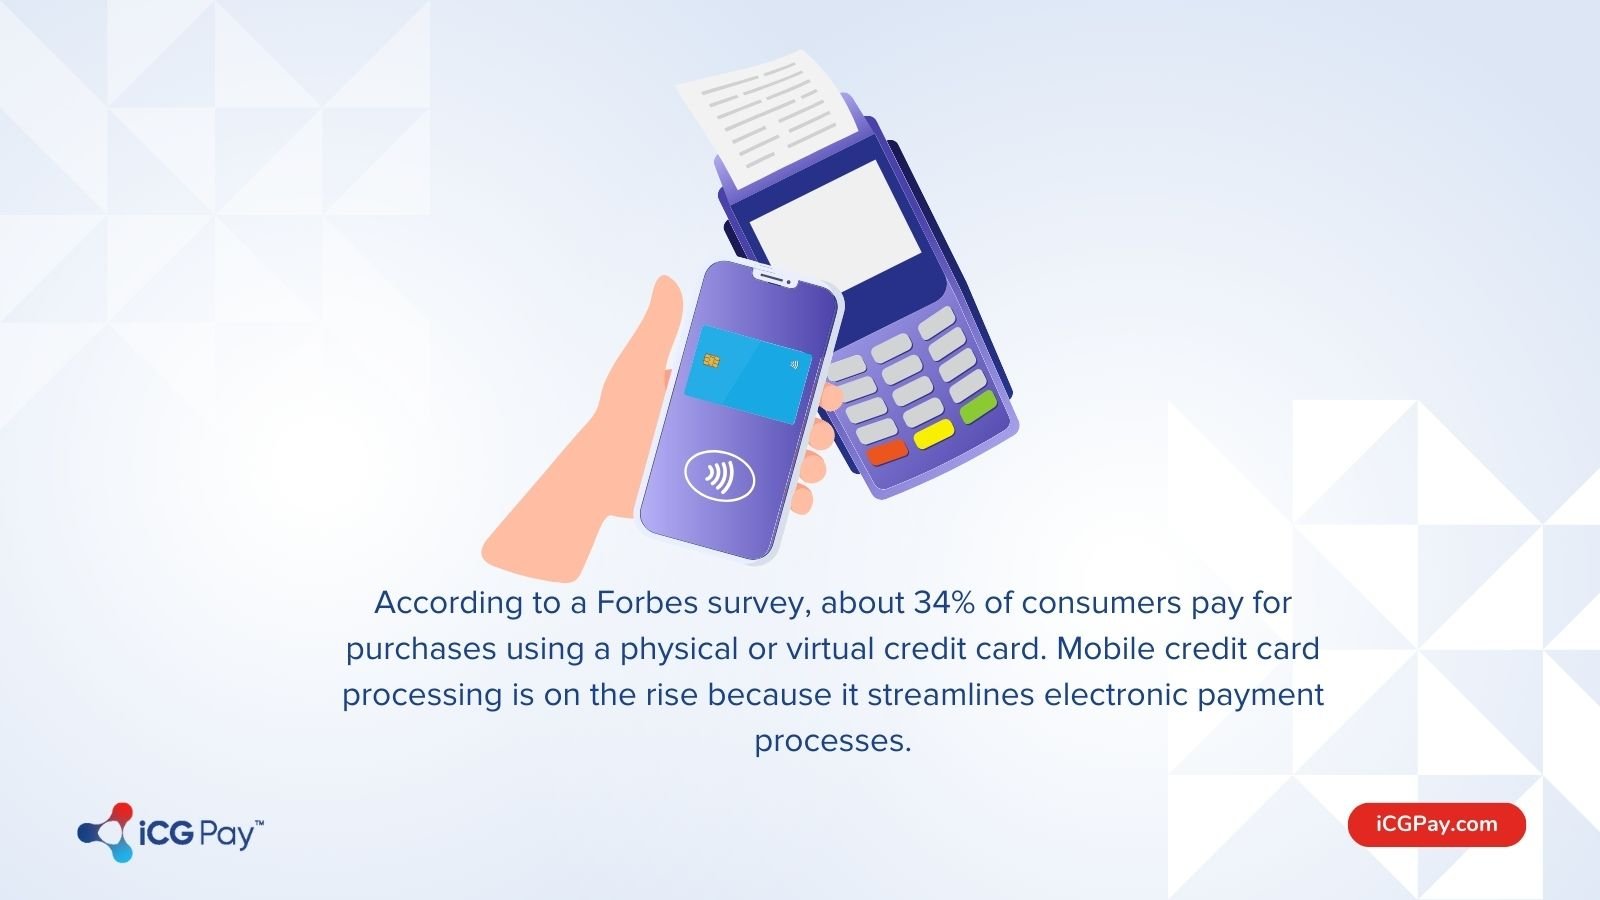 Mobile credit card processing is on the rise